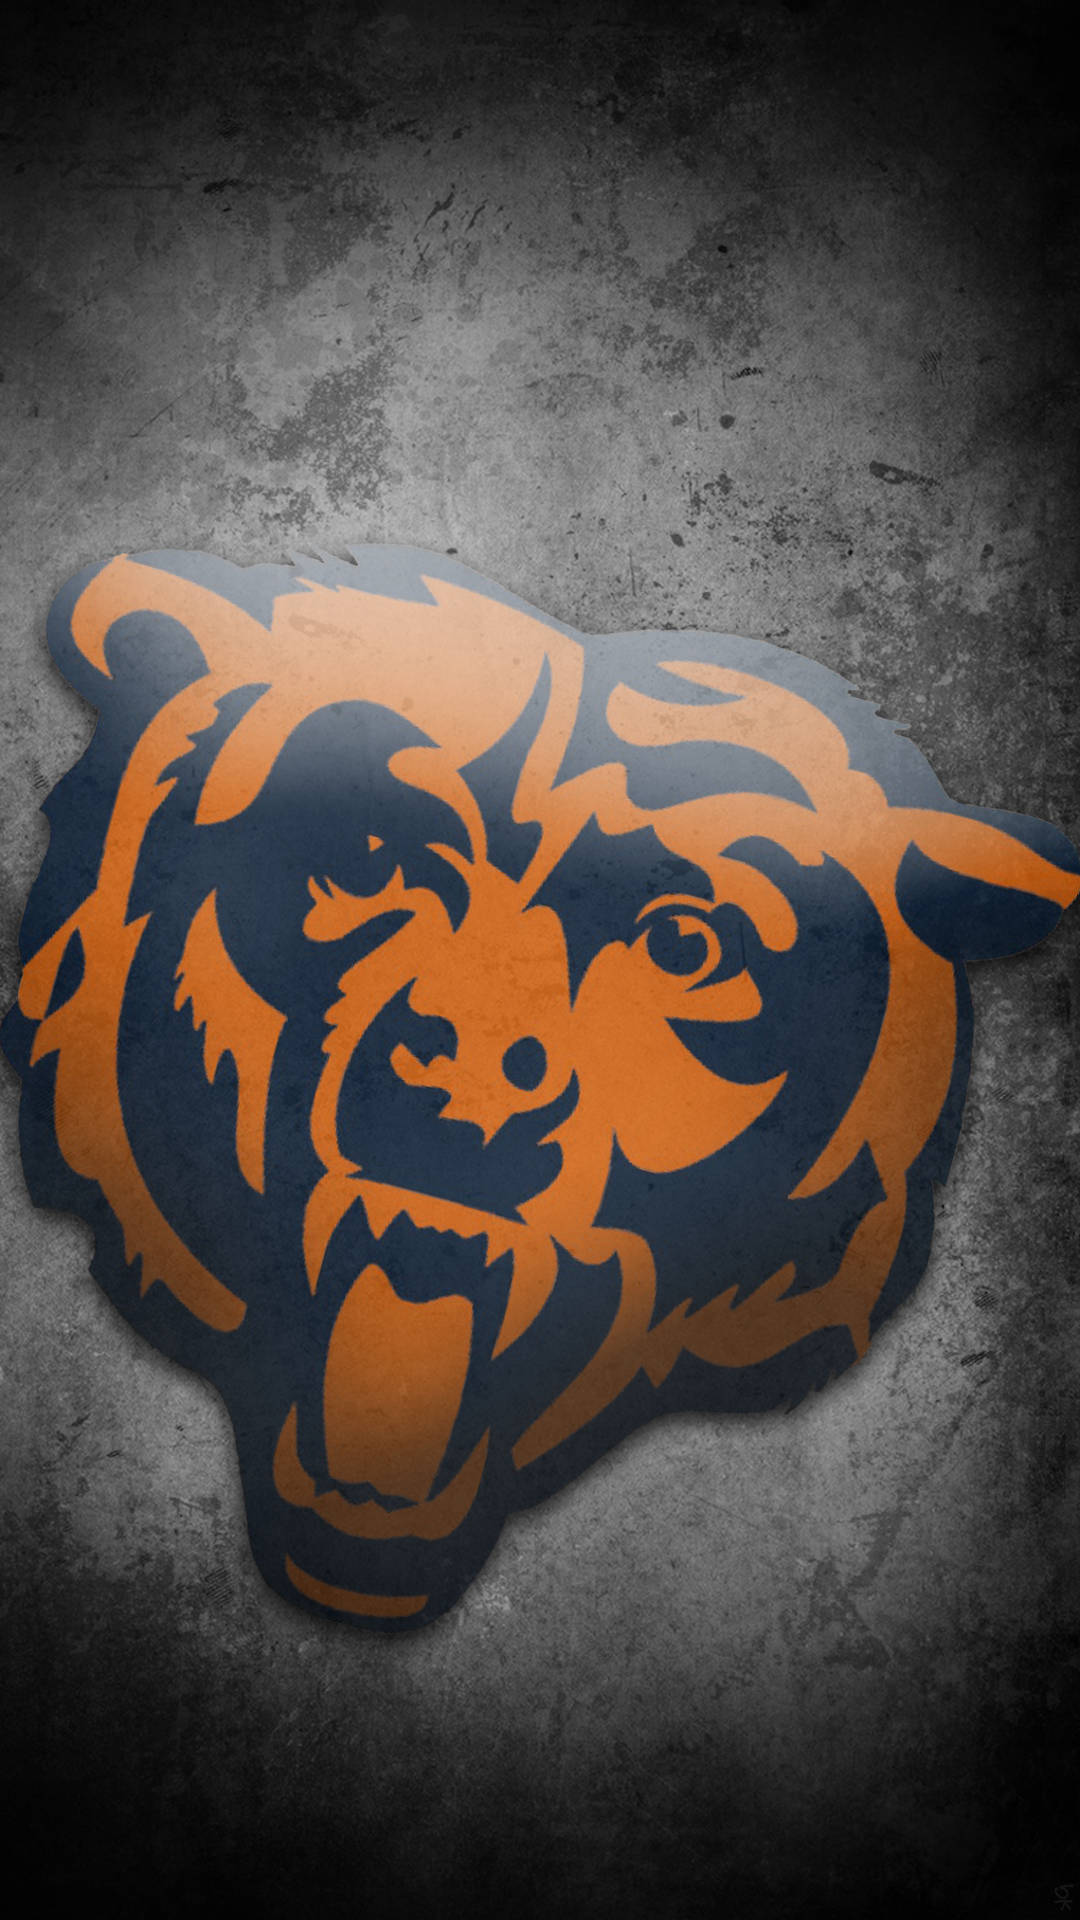 Chicago Bears 1080X1920 Wallpaper and Background Image